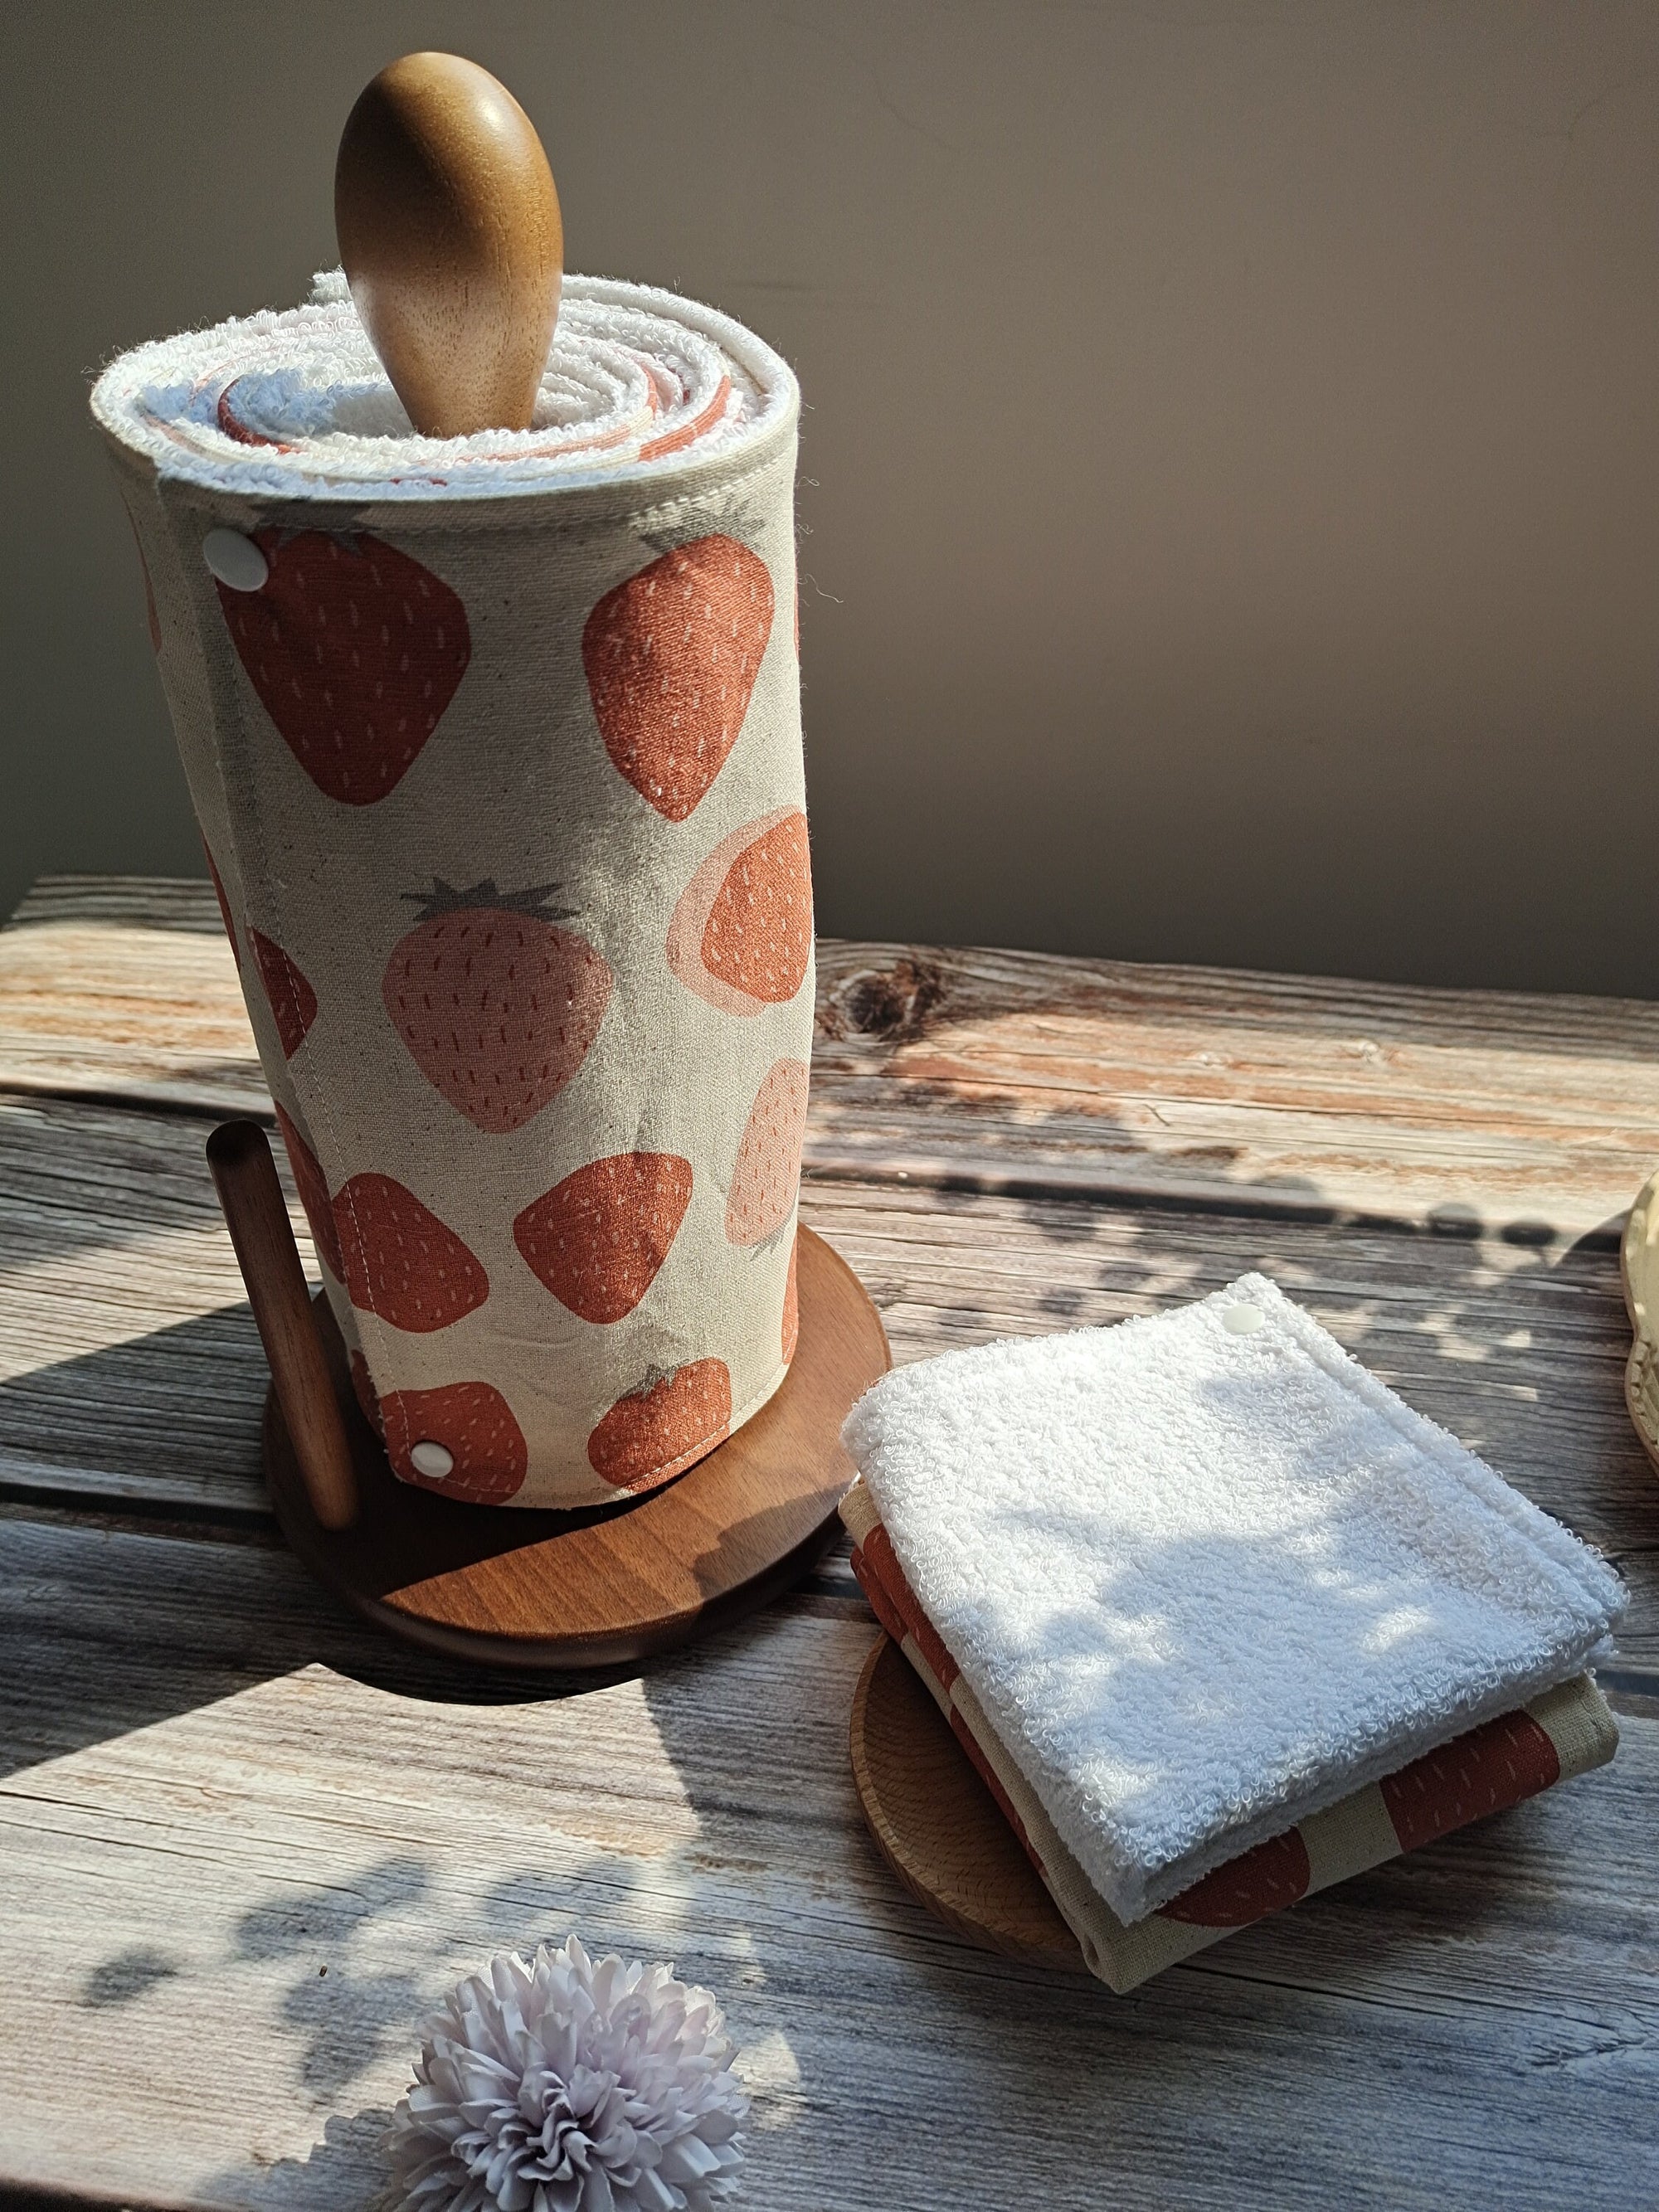 Paperless Kitchen Towels, Zero Waste, Reusable paper towels roll with snaps Kitchen Clothes, eco-friendly Dish Towels Strawberry